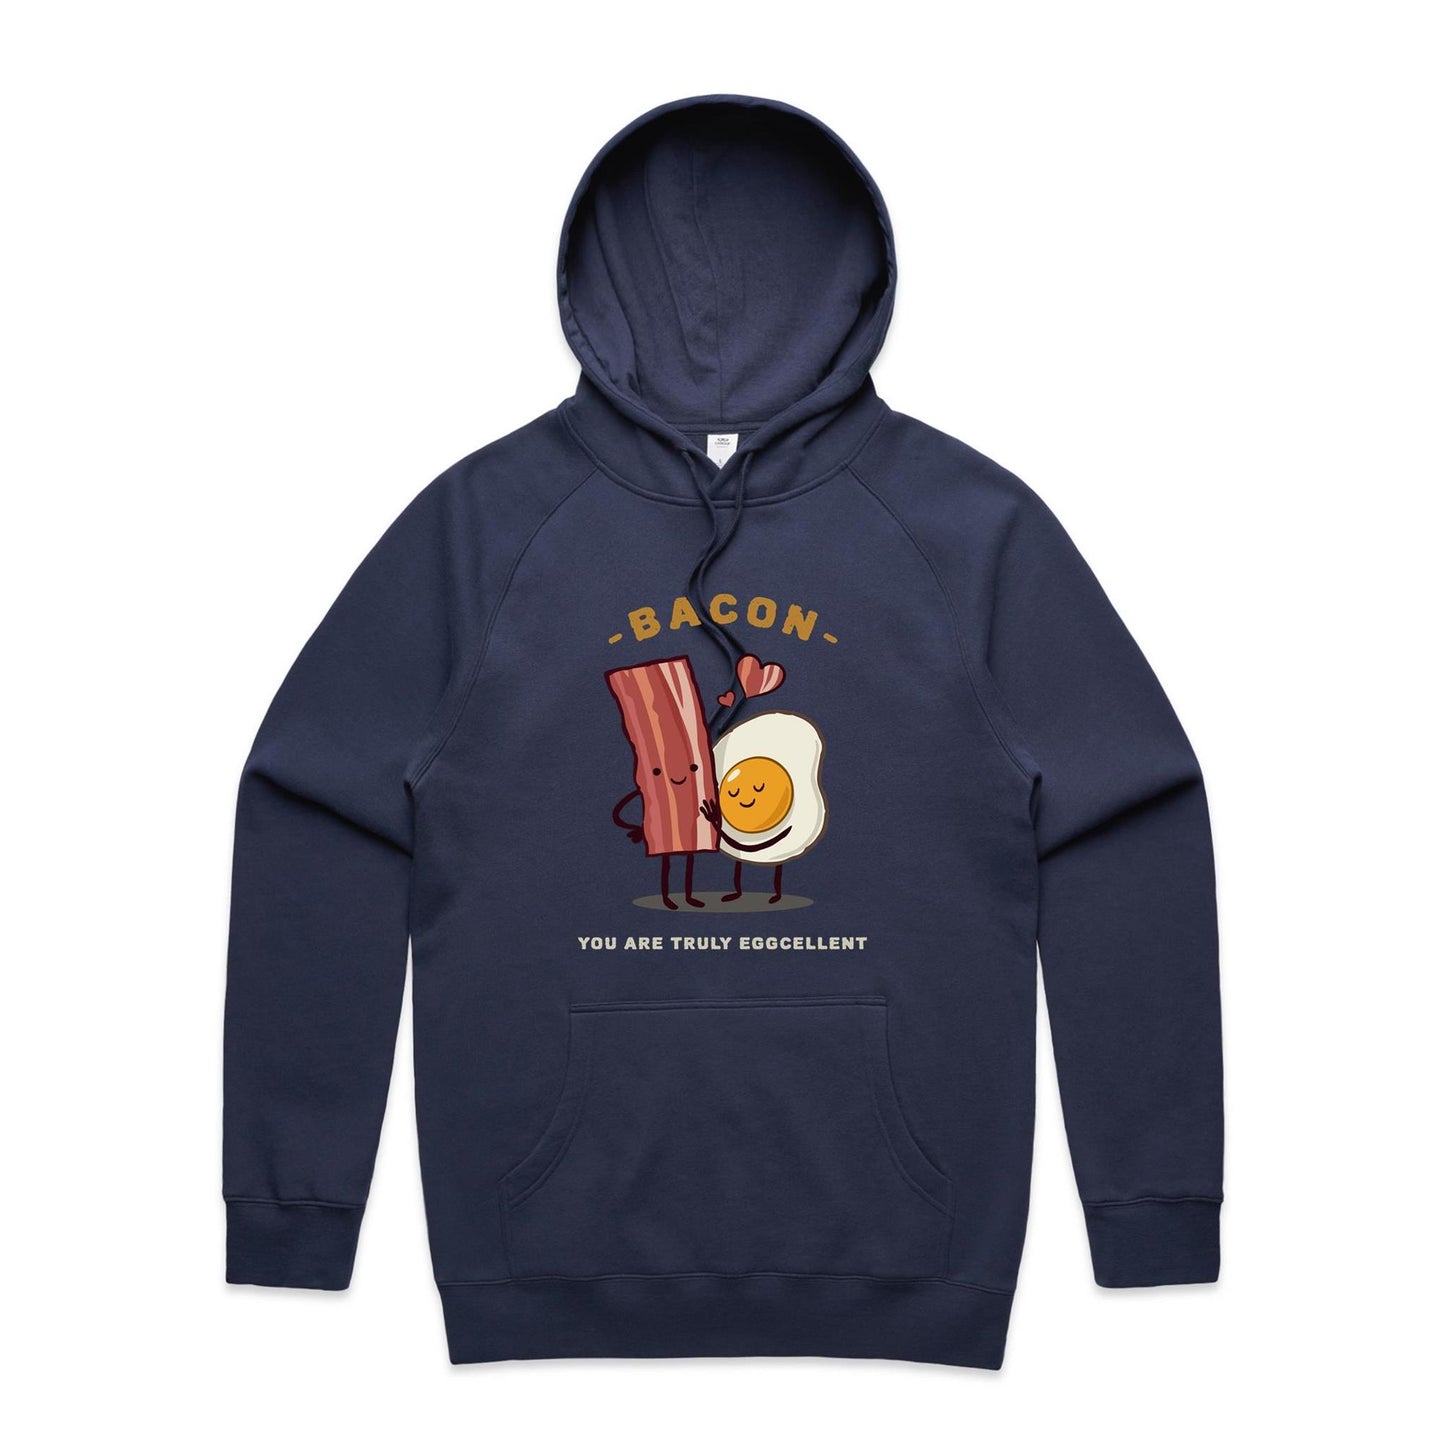 Bacon, You Are Truly Eggcellent - Supply Hood Midnight Blue Mens Supply Hoodie Food